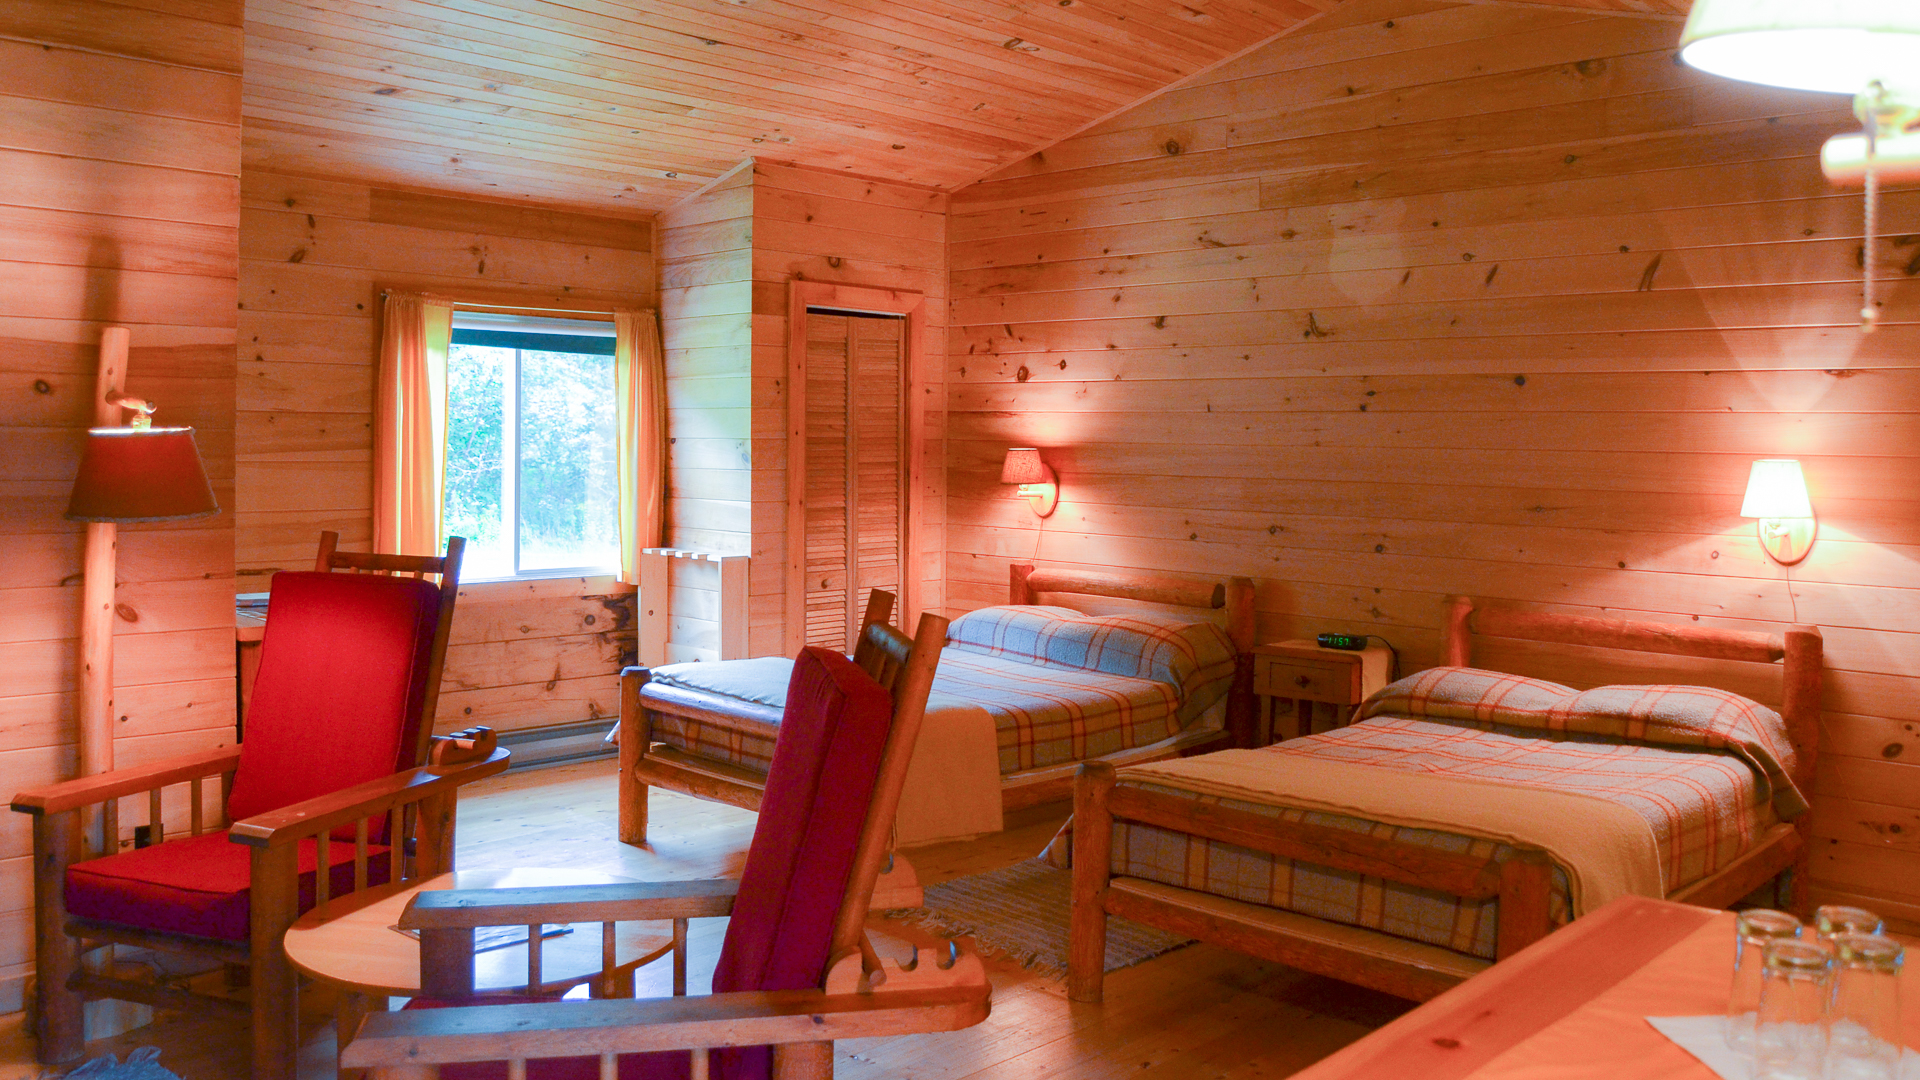 Accommodation for your group vacation is in separate lodges beside the main lodge.